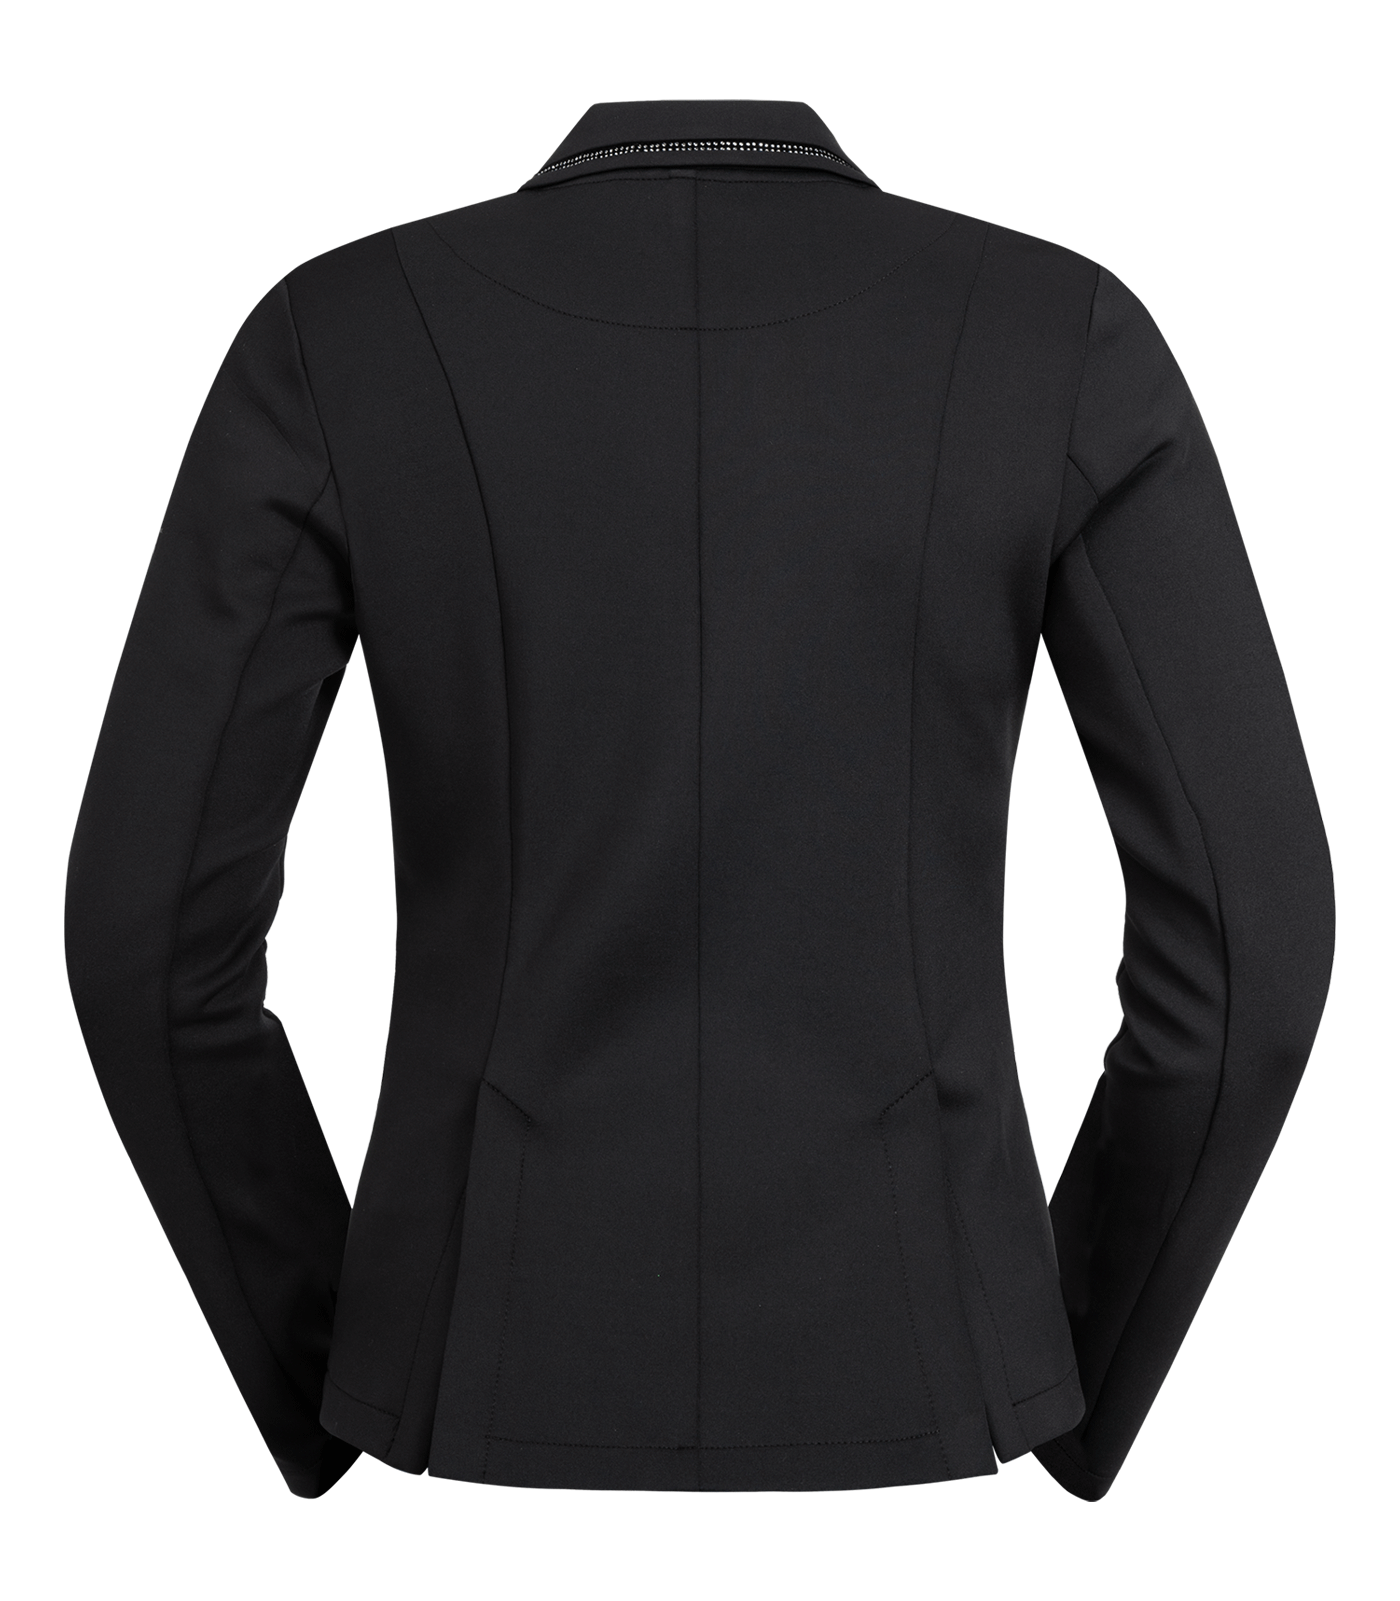 Lina Ladies Competition Jacket